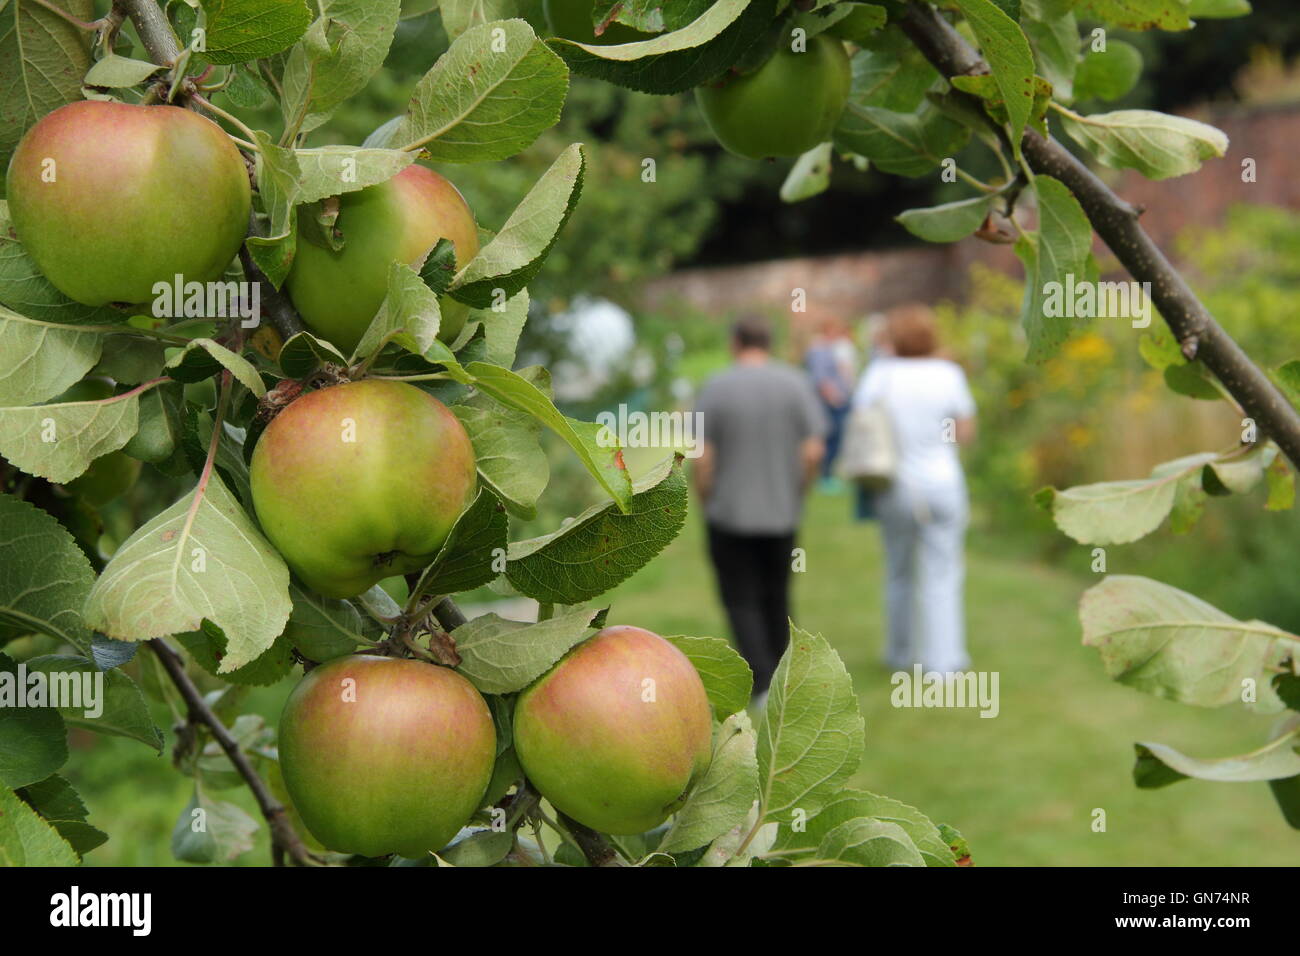 White Melrose apples growing in an English orchard during an open day event, UK - summer Stock Photo